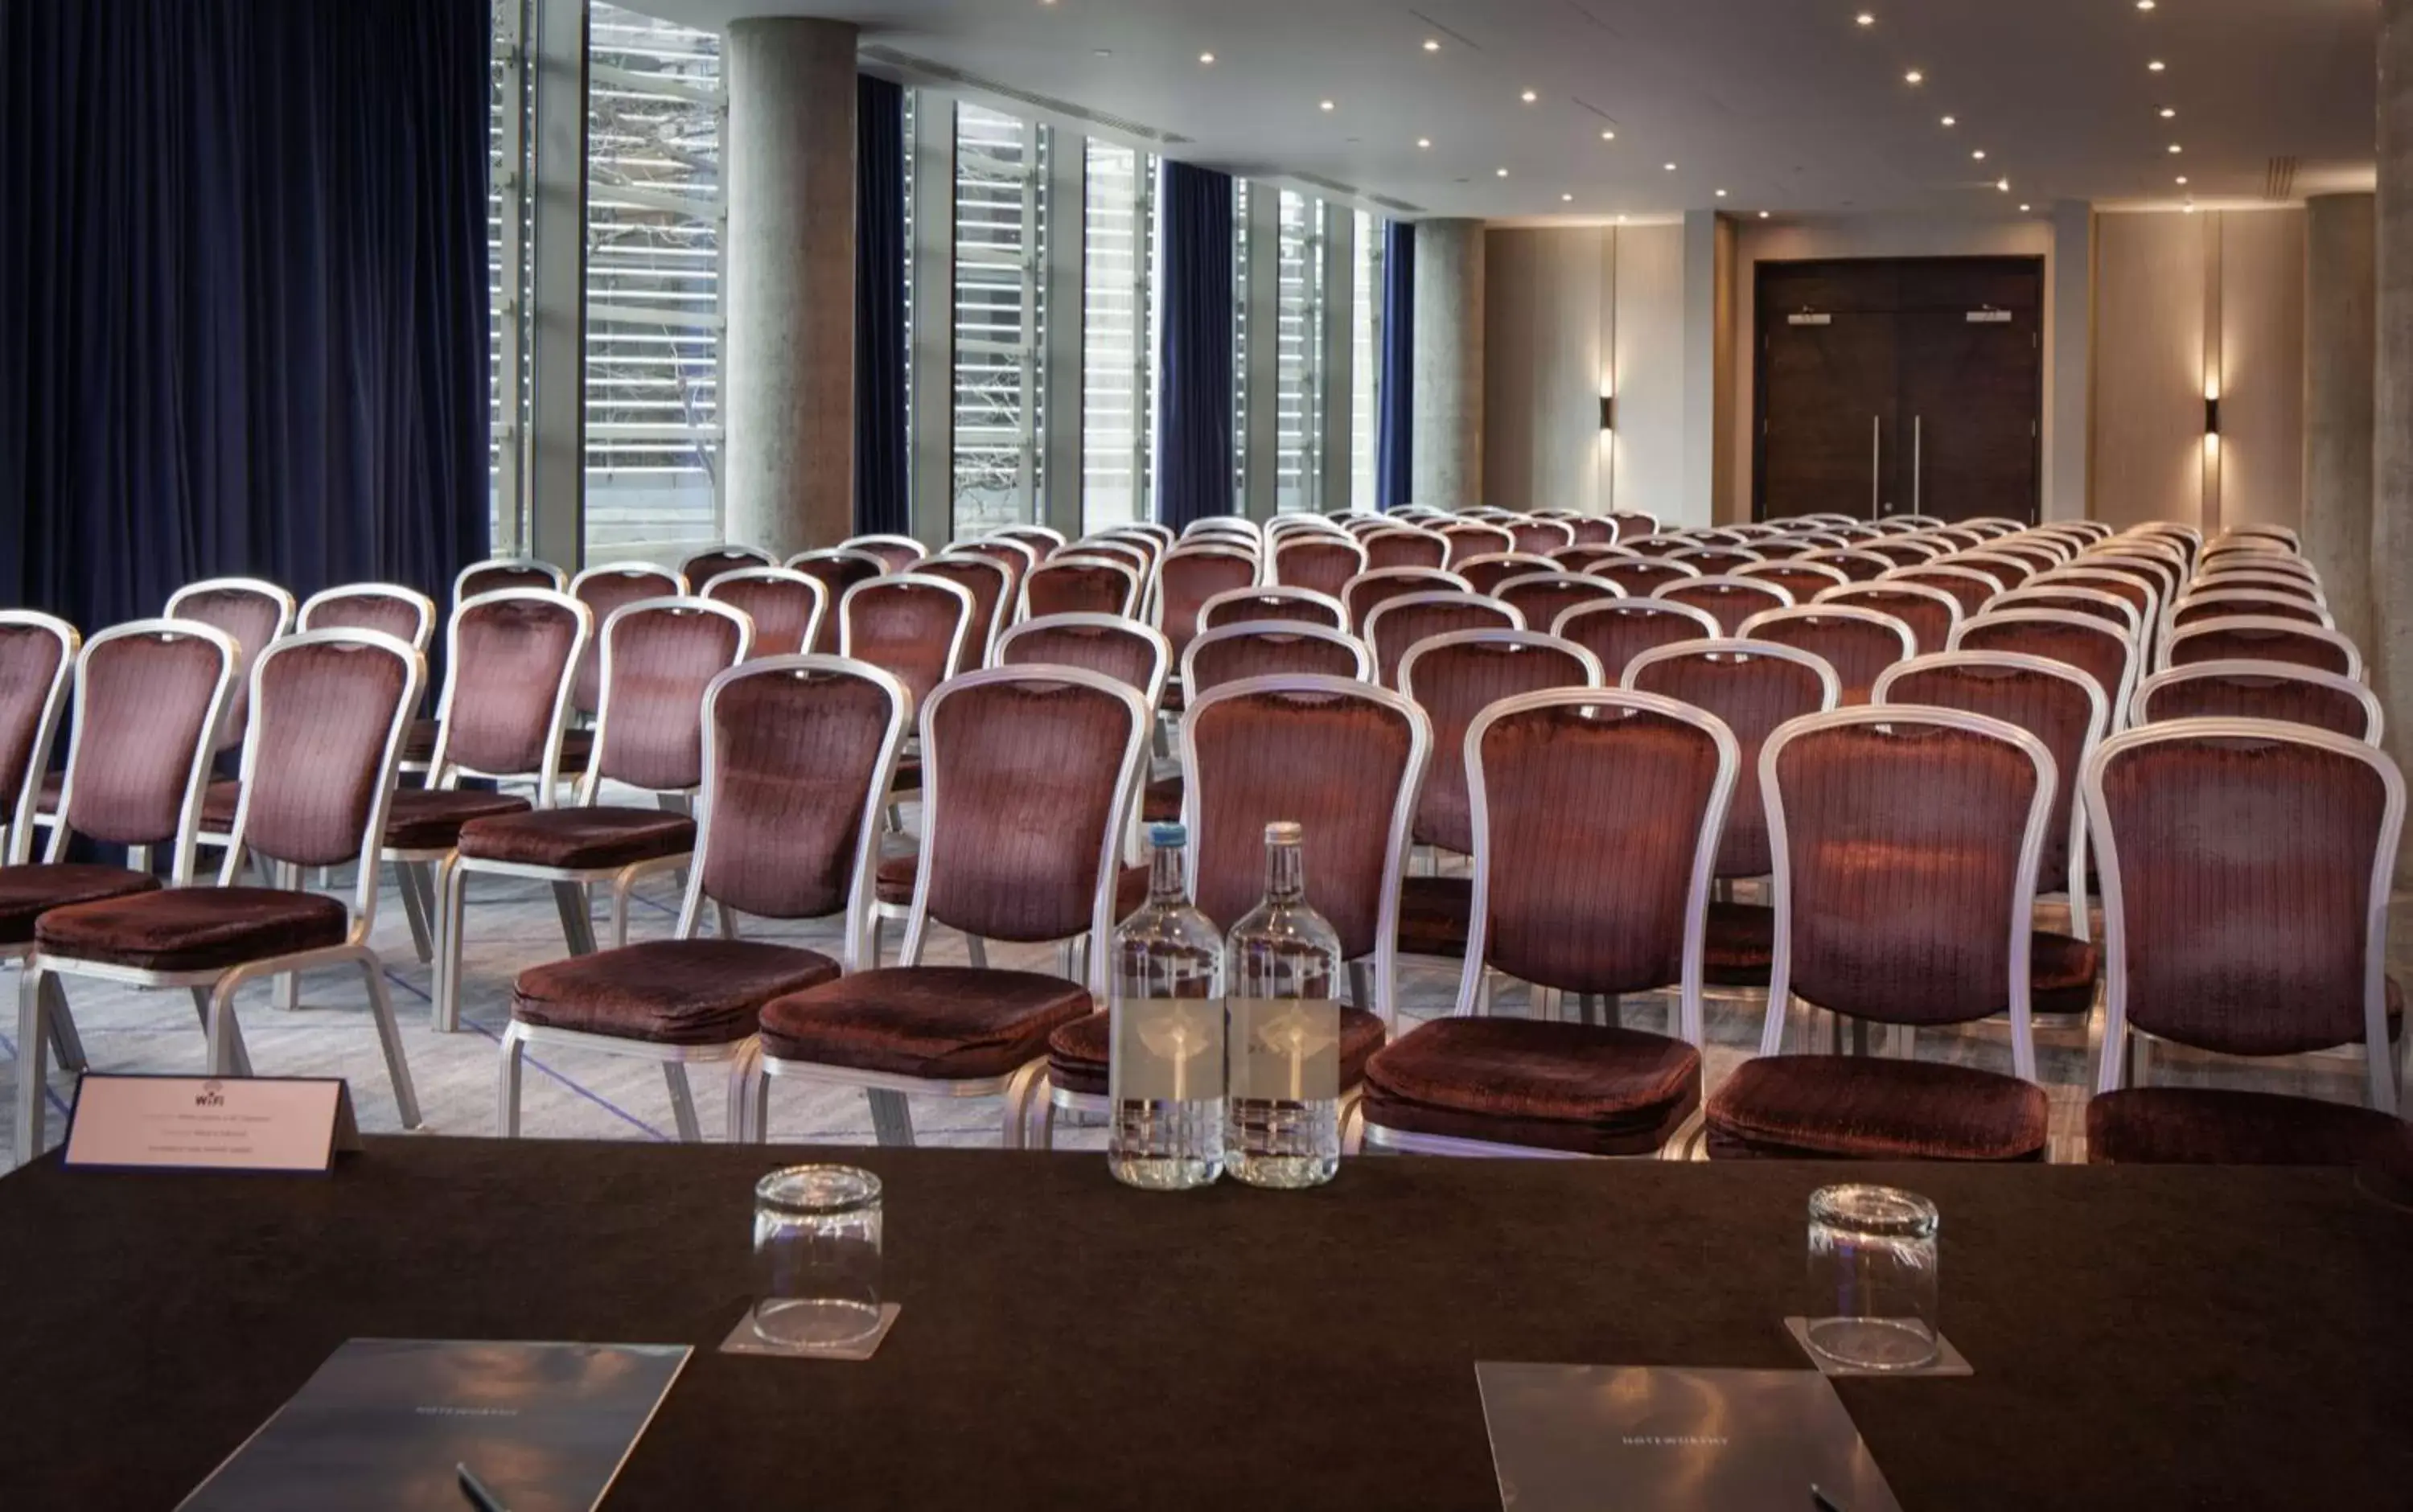 Meeting/conference room in Hilton London Tower Bridge